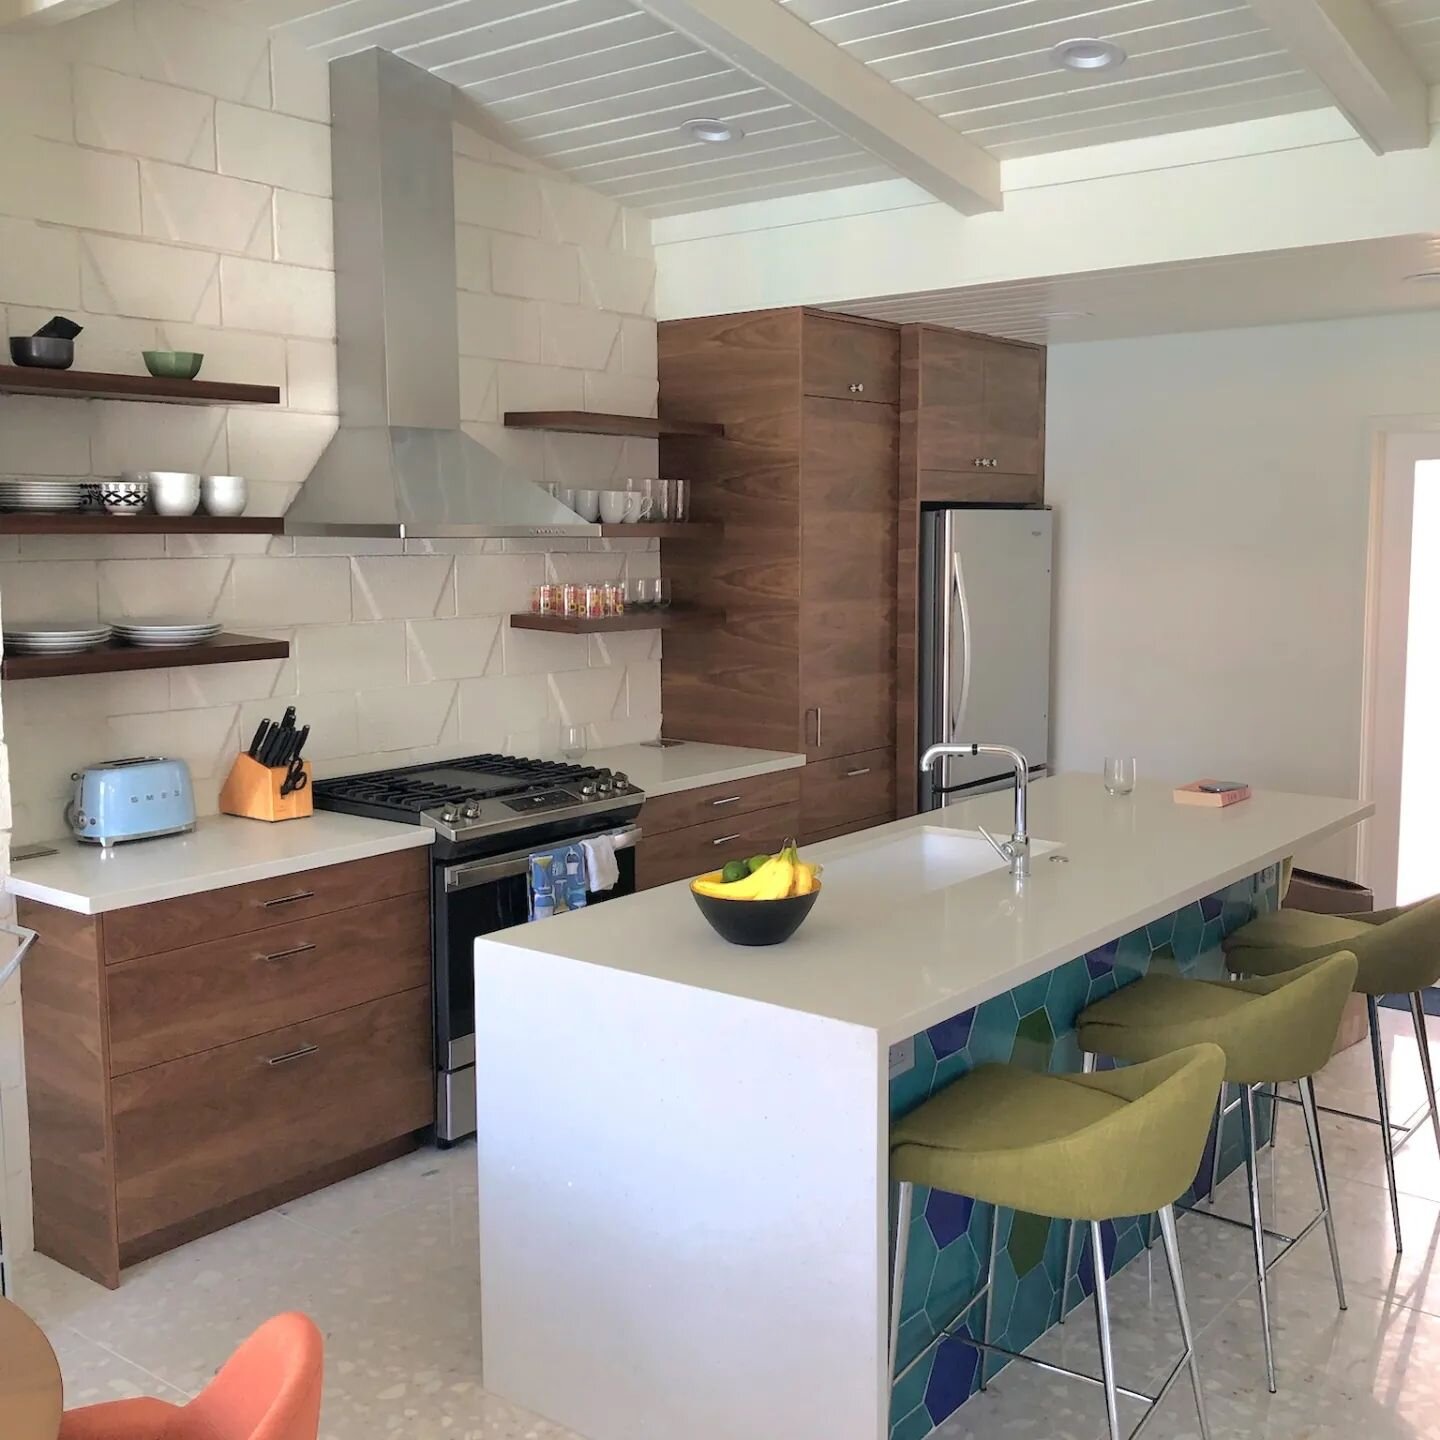 When my former clients told me they purchased a Mid-century vacation condo in Palm Springs, CA and wanted me to help them re-imaging the space I was so excited!  They loved the existing unique block wall so I turned the Kitchen to turn it into the fo